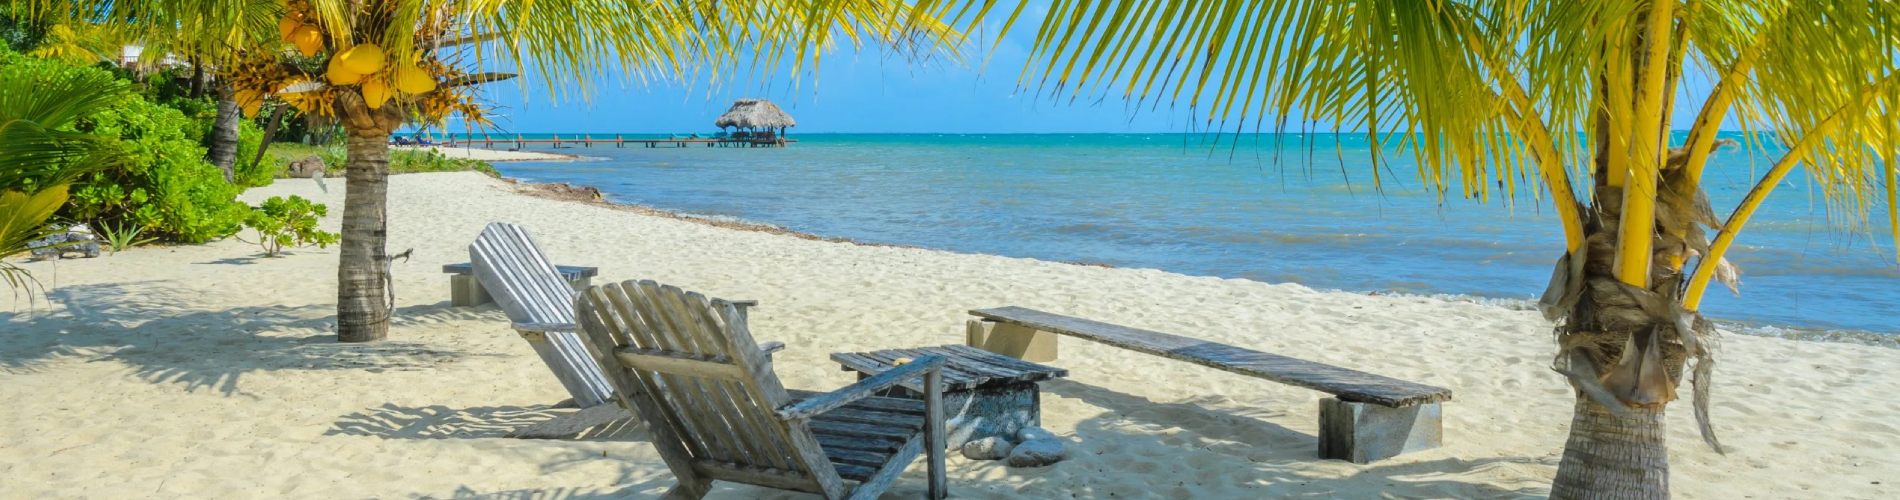 Charter Tours in Belize